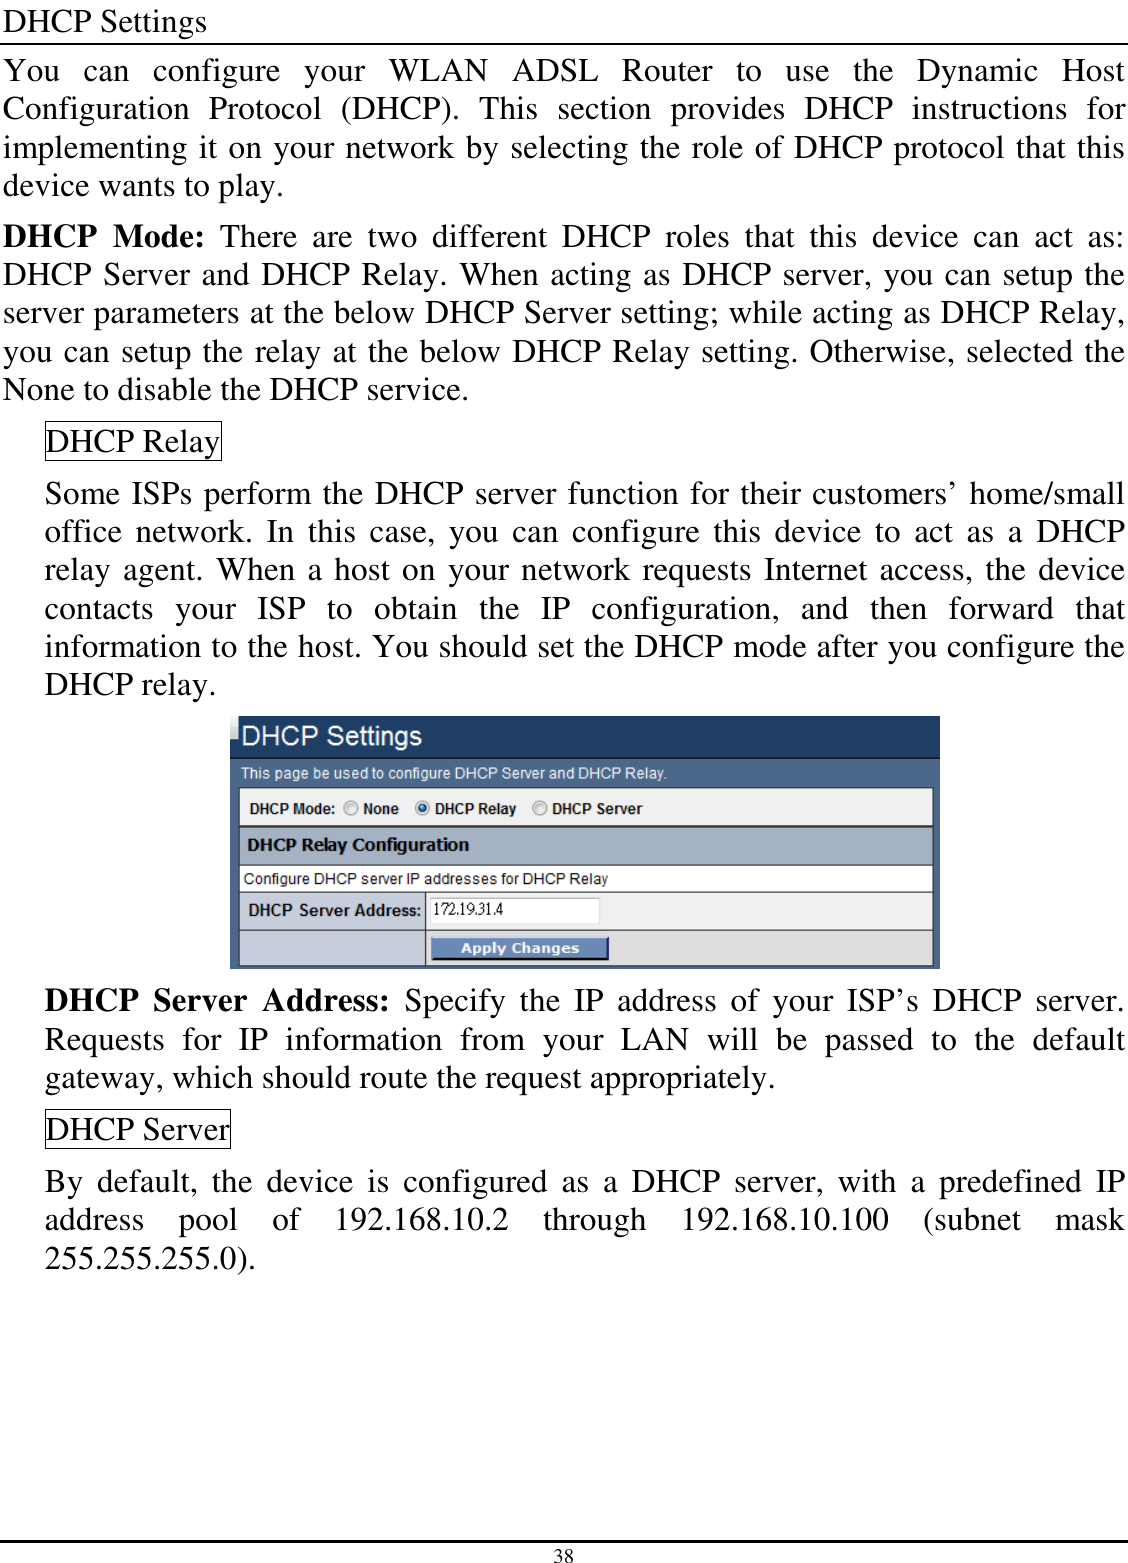 38 DHCP Settings You  can  configure  your  WLAN  ADSL  Router  to  use  the  Dynamic  Host Configuration  Protocol  (DHCP).  This  section  provides  DHCP  instructions  for implementing it on your network by selecting the role of DHCP protocol that this device wants to play.  DHCP  Mode:  There  are  two  different  DHCP  roles  that  this  device  can  act  as: DHCP Server and DHCP Relay. When acting as DHCP server, you can setup the server parameters at the below DHCP Server setting; while acting as DHCP Relay, you can setup the relay at the below DHCP Relay setting. Otherwise, selected the None to disable the DHCP service. DHCP Relay Some ISPs perform the DHCP server function for their customers’ home/small office  network.  In  this case,  you  can configure  this device to  act  as  a  DHCP relay agent. When a host on your network requests Internet access, the device contacts  your  ISP  to  obtain  the  IP  configuration,  and  then  forward  that information to the host. You should set the DHCP mode after you configure the DHCP relay.  DHCP  Server  Address:  Specify  the  IP address  of  your  ISP’s  DHCP  server. Requests  for  IP  information  from  your  LAN  will  be  passed  to  the  default gateway, which should route the request appropriately. DHCP Server By  default,  the  device  is  configured  as  a  DHCP  server,  with  a  predefined  IP address  pool  of  192.168.10.2  through  192.168.10.100  (subnet  mask 255.255.255.0). 